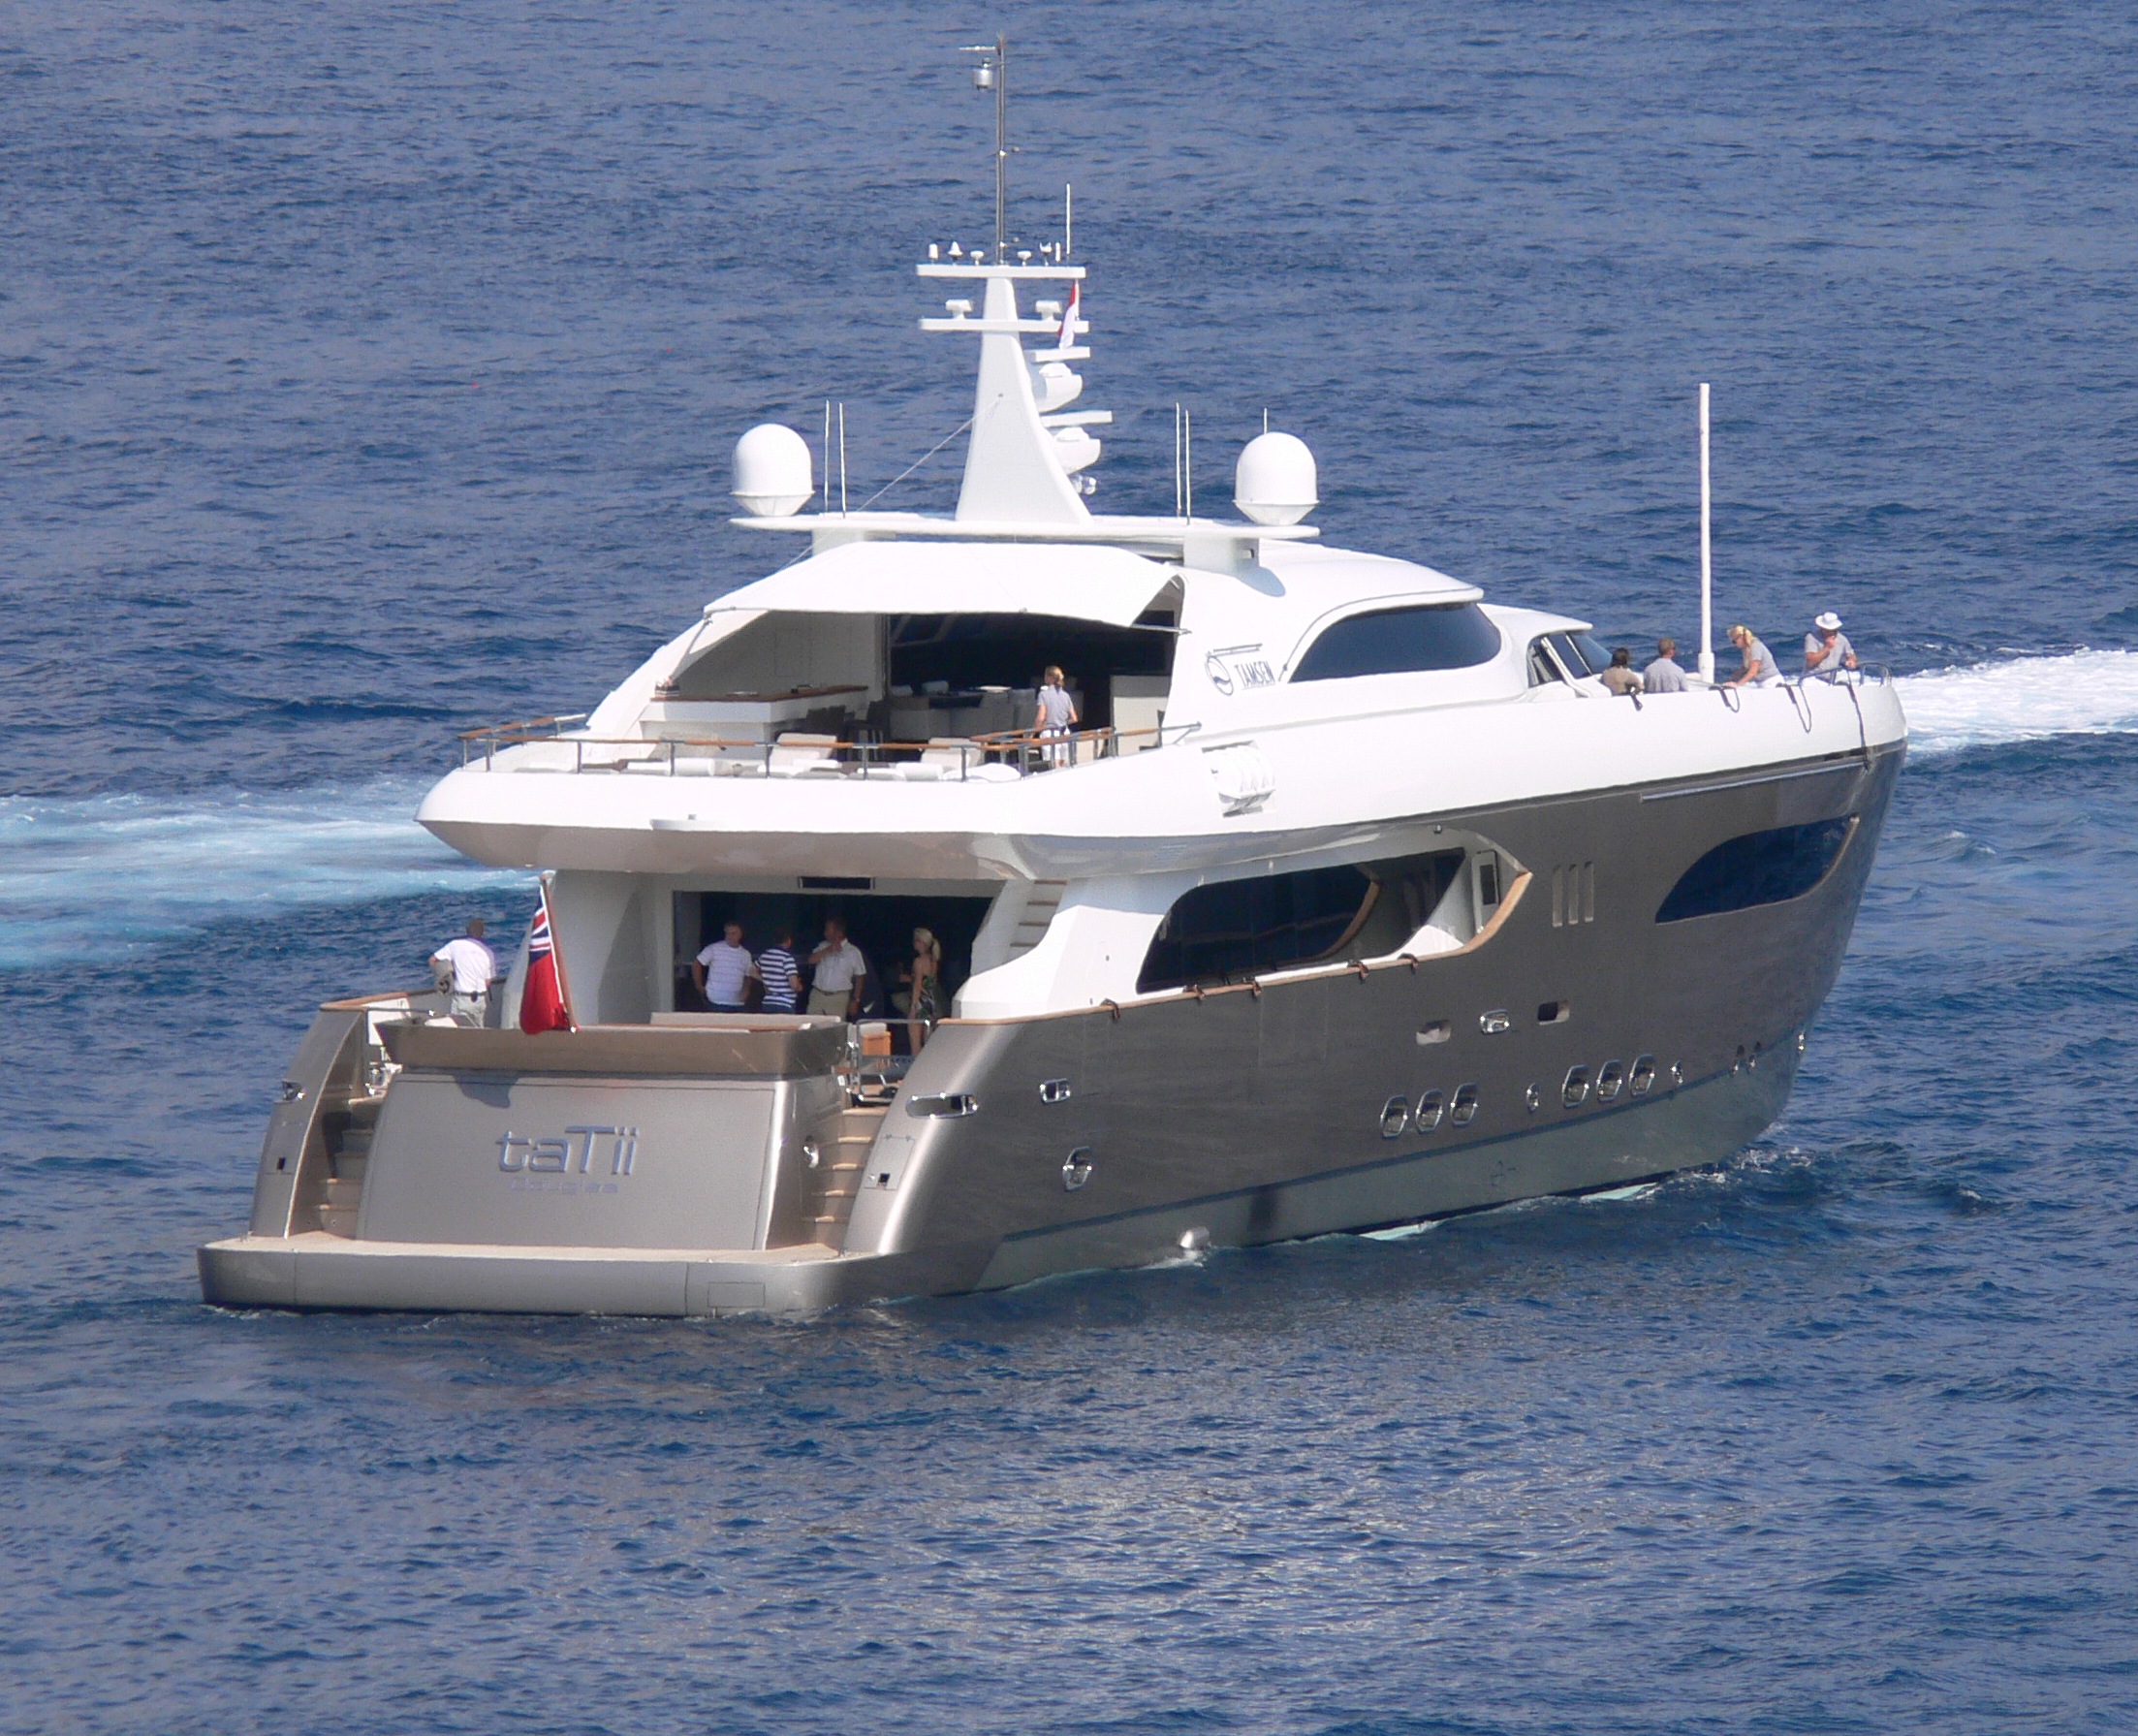 This large luxury yacht TATII is a motor yacht. 